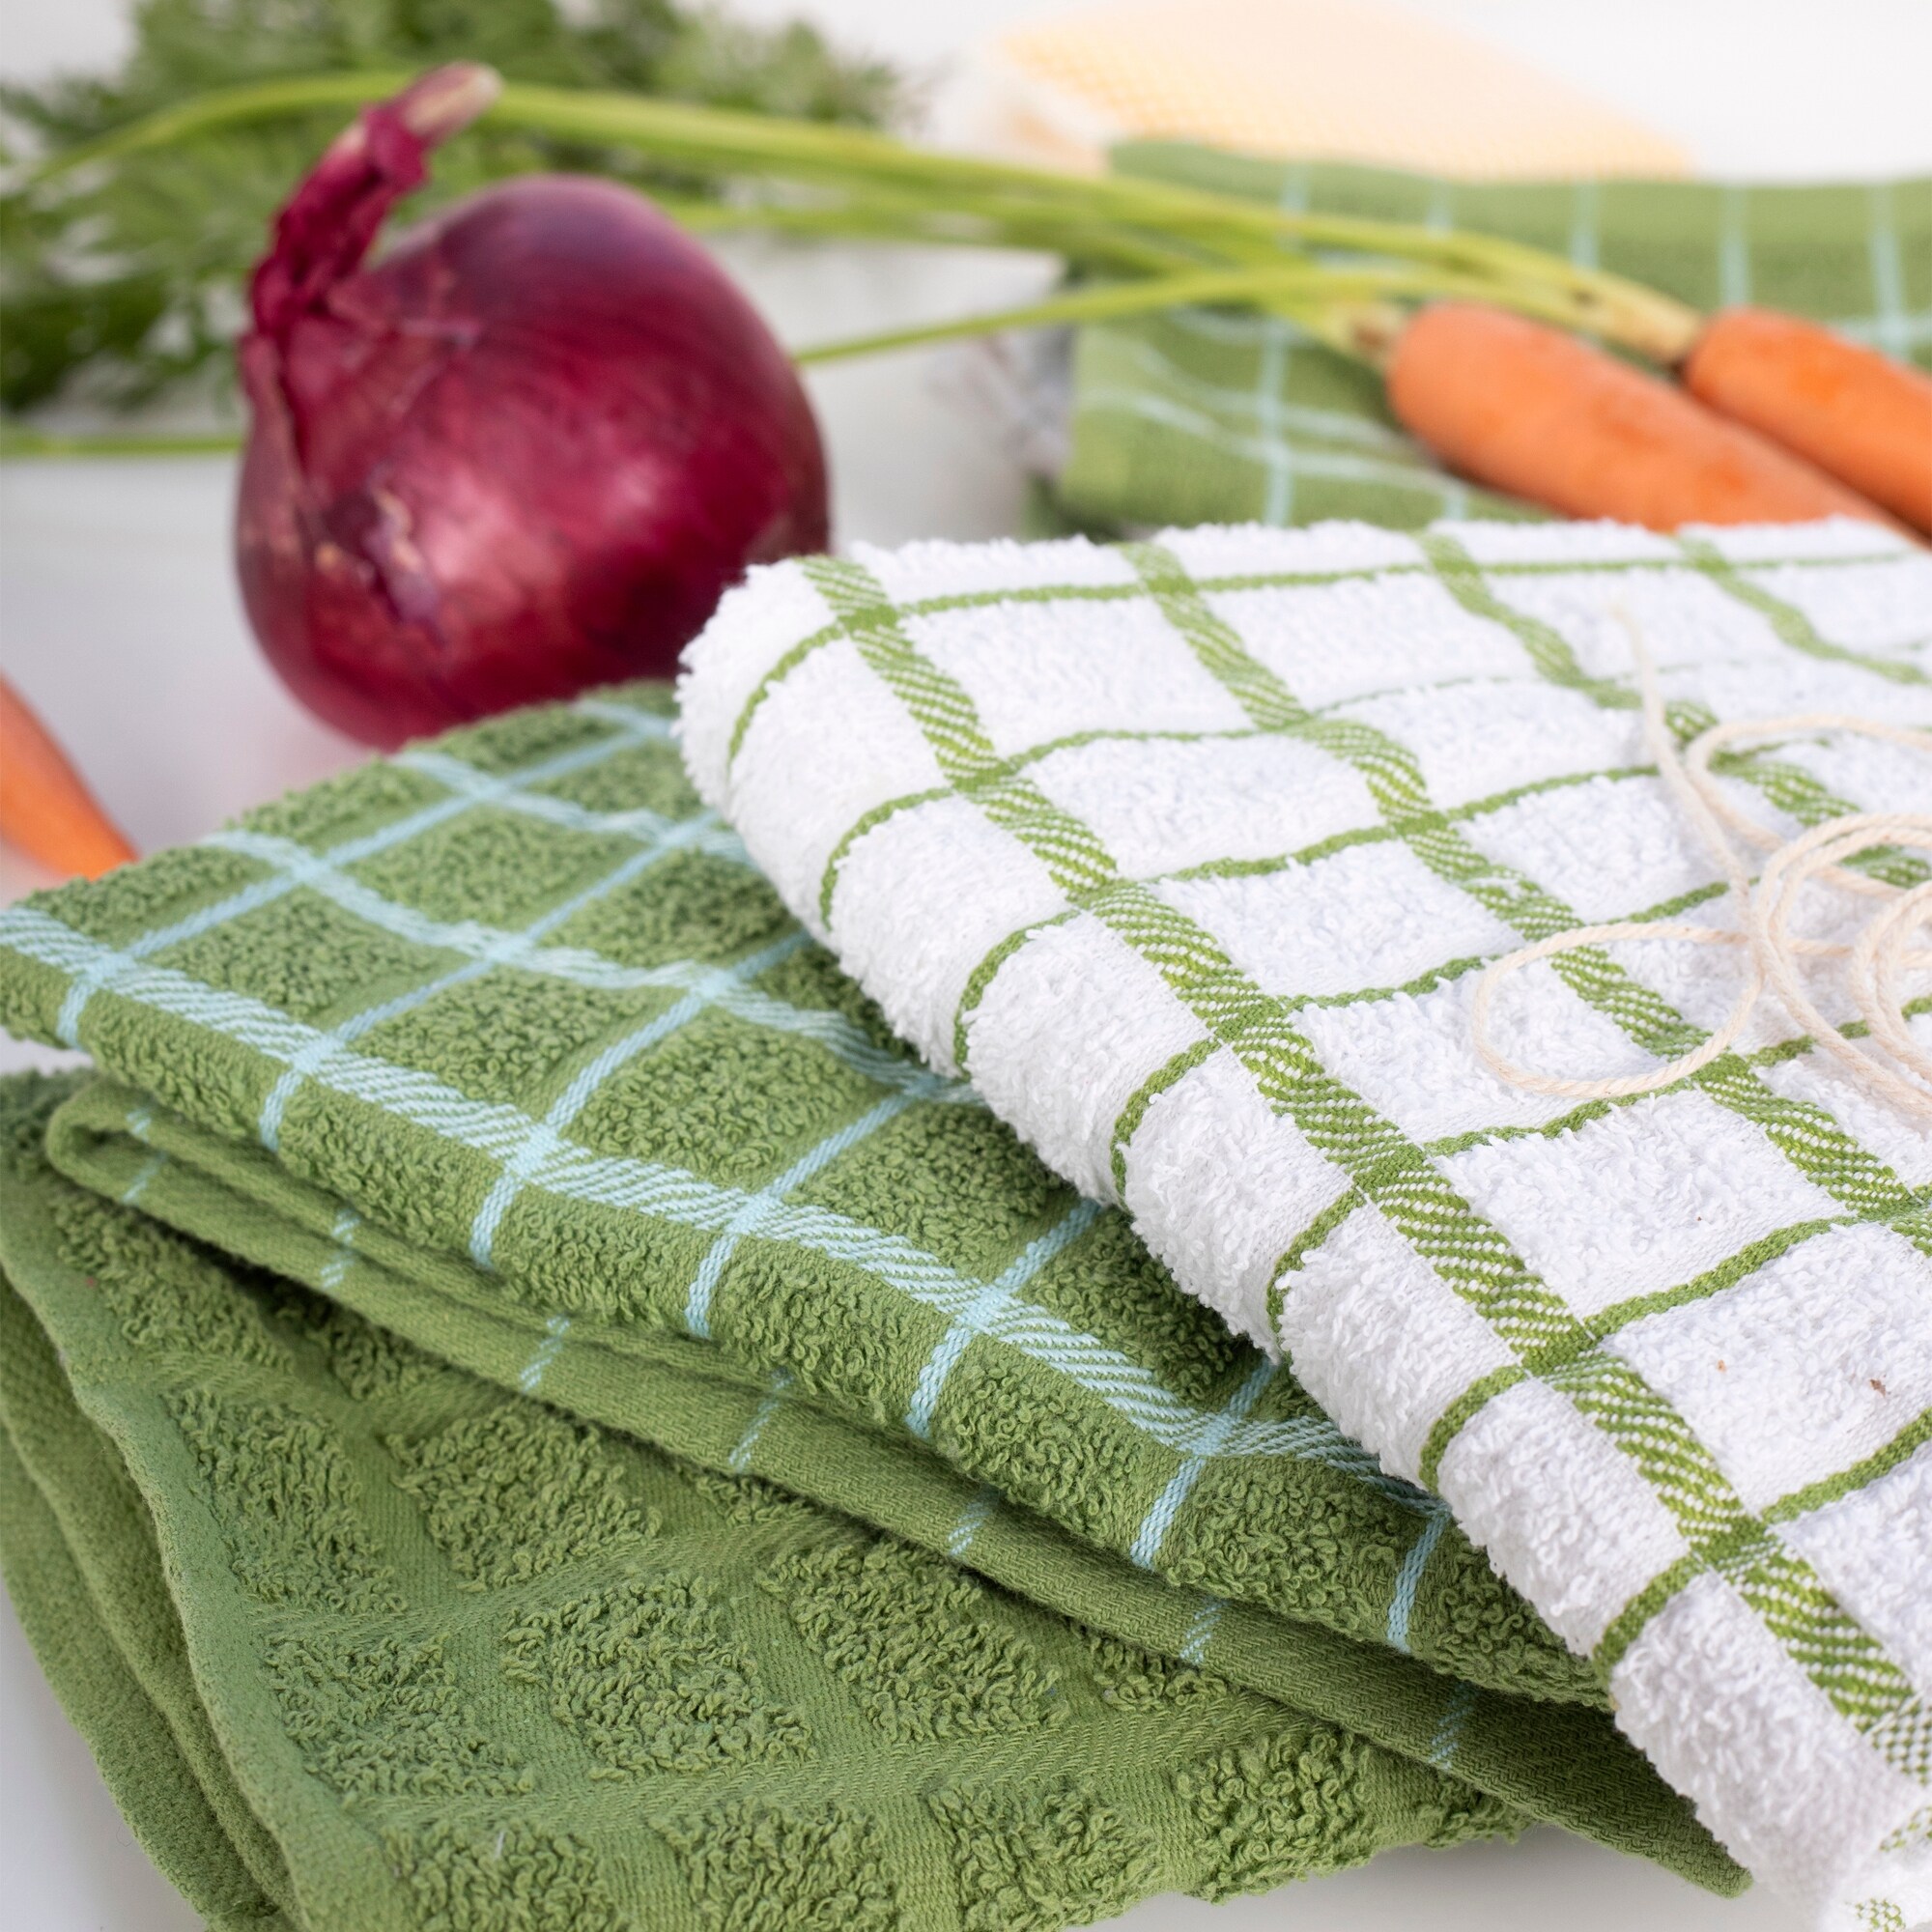 https://ak1.ostkcdn.com/images/products/is/images/direct/a28740eb048293ea5ee95b2b483251b4cb447e21/RITZ-Terry-Check-Kitchen-Towel%2C-Set-of-3.jpg